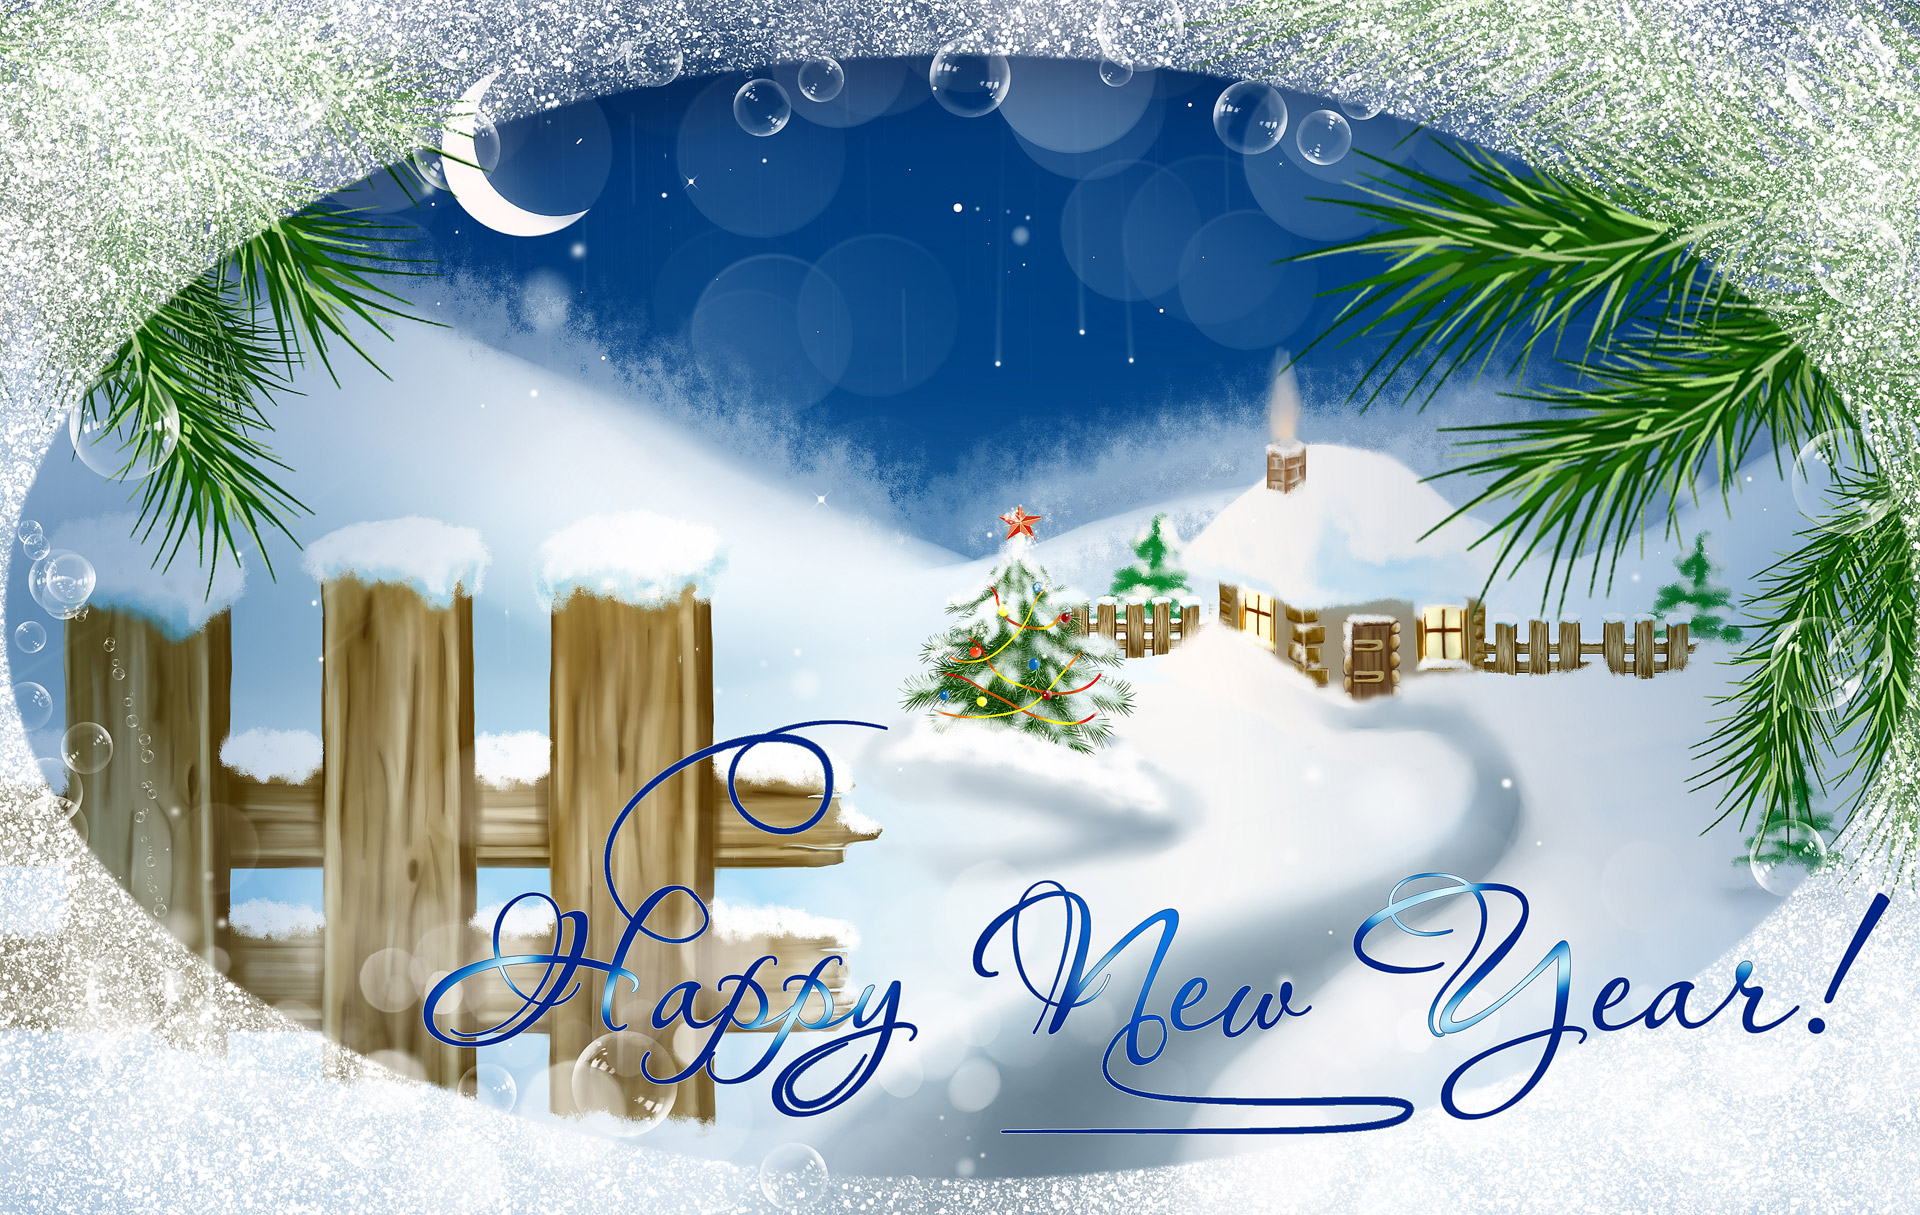 Digital painting postcards with the new year